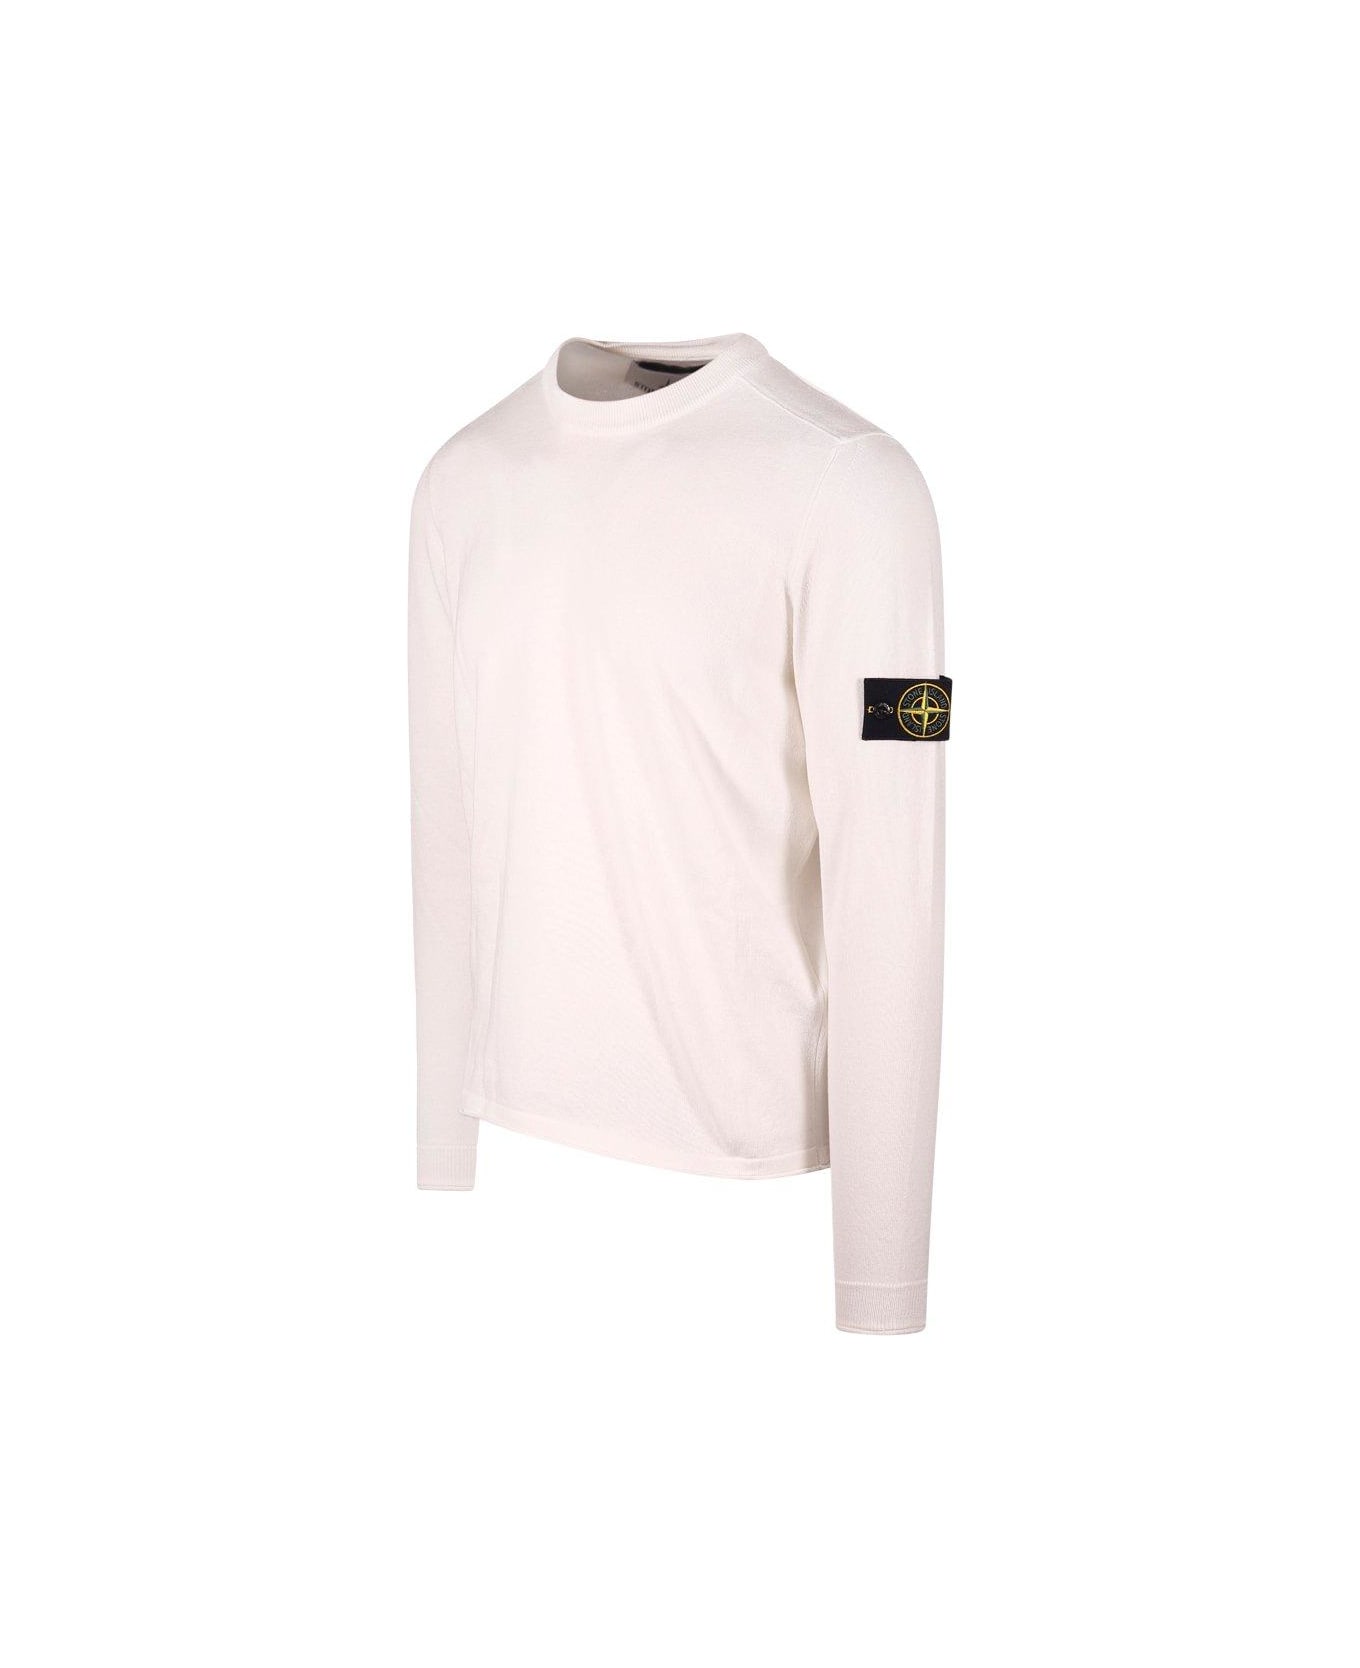 Stone Island Compass Patch Crewneck Knitted Jumper - Bianco